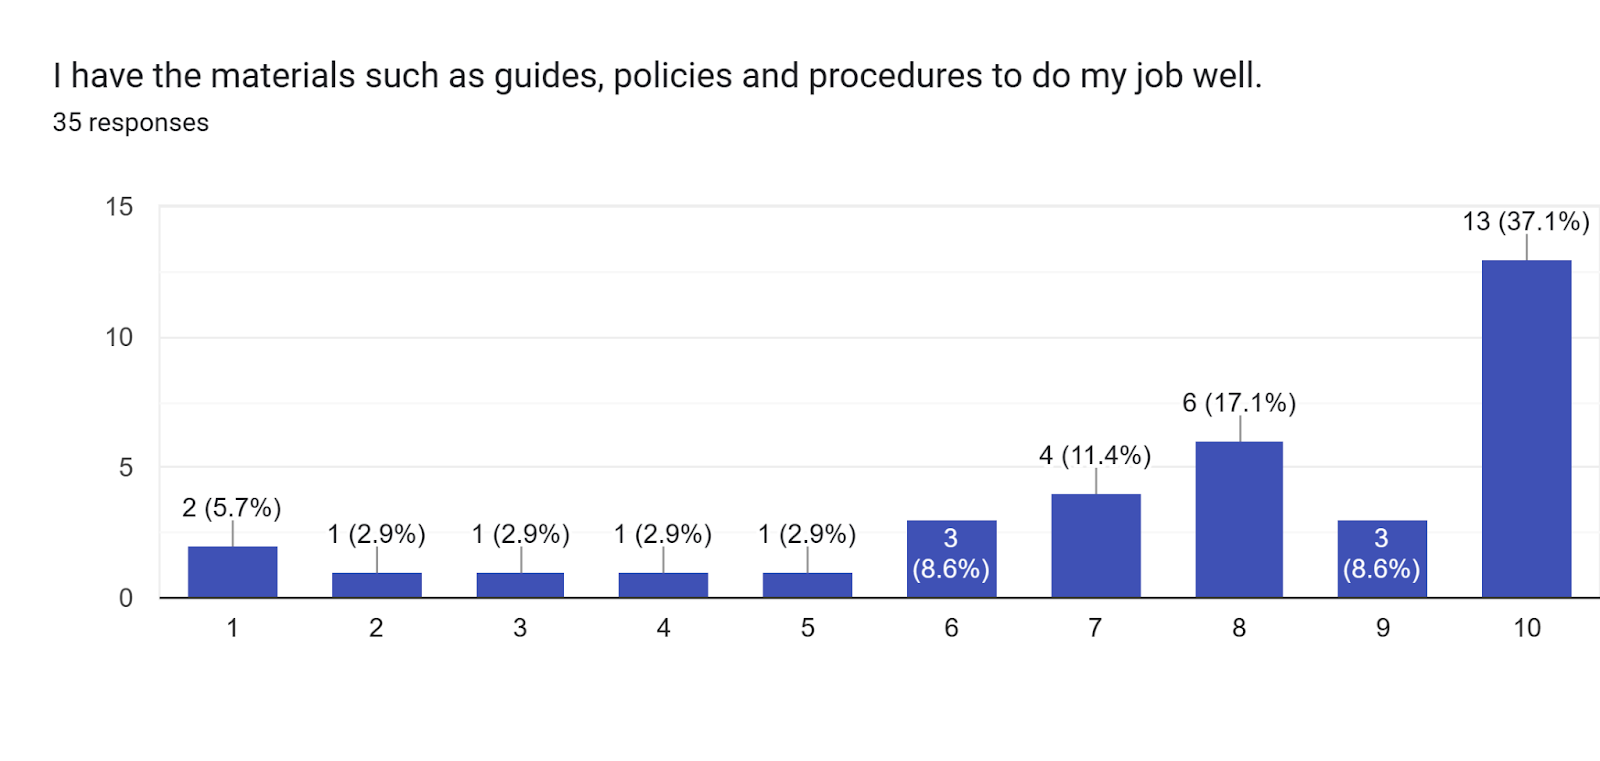 Forms response chart. Question title: I have the materials such as guides, policies and procedures to do my job well.. Number of responses: 35 responses.